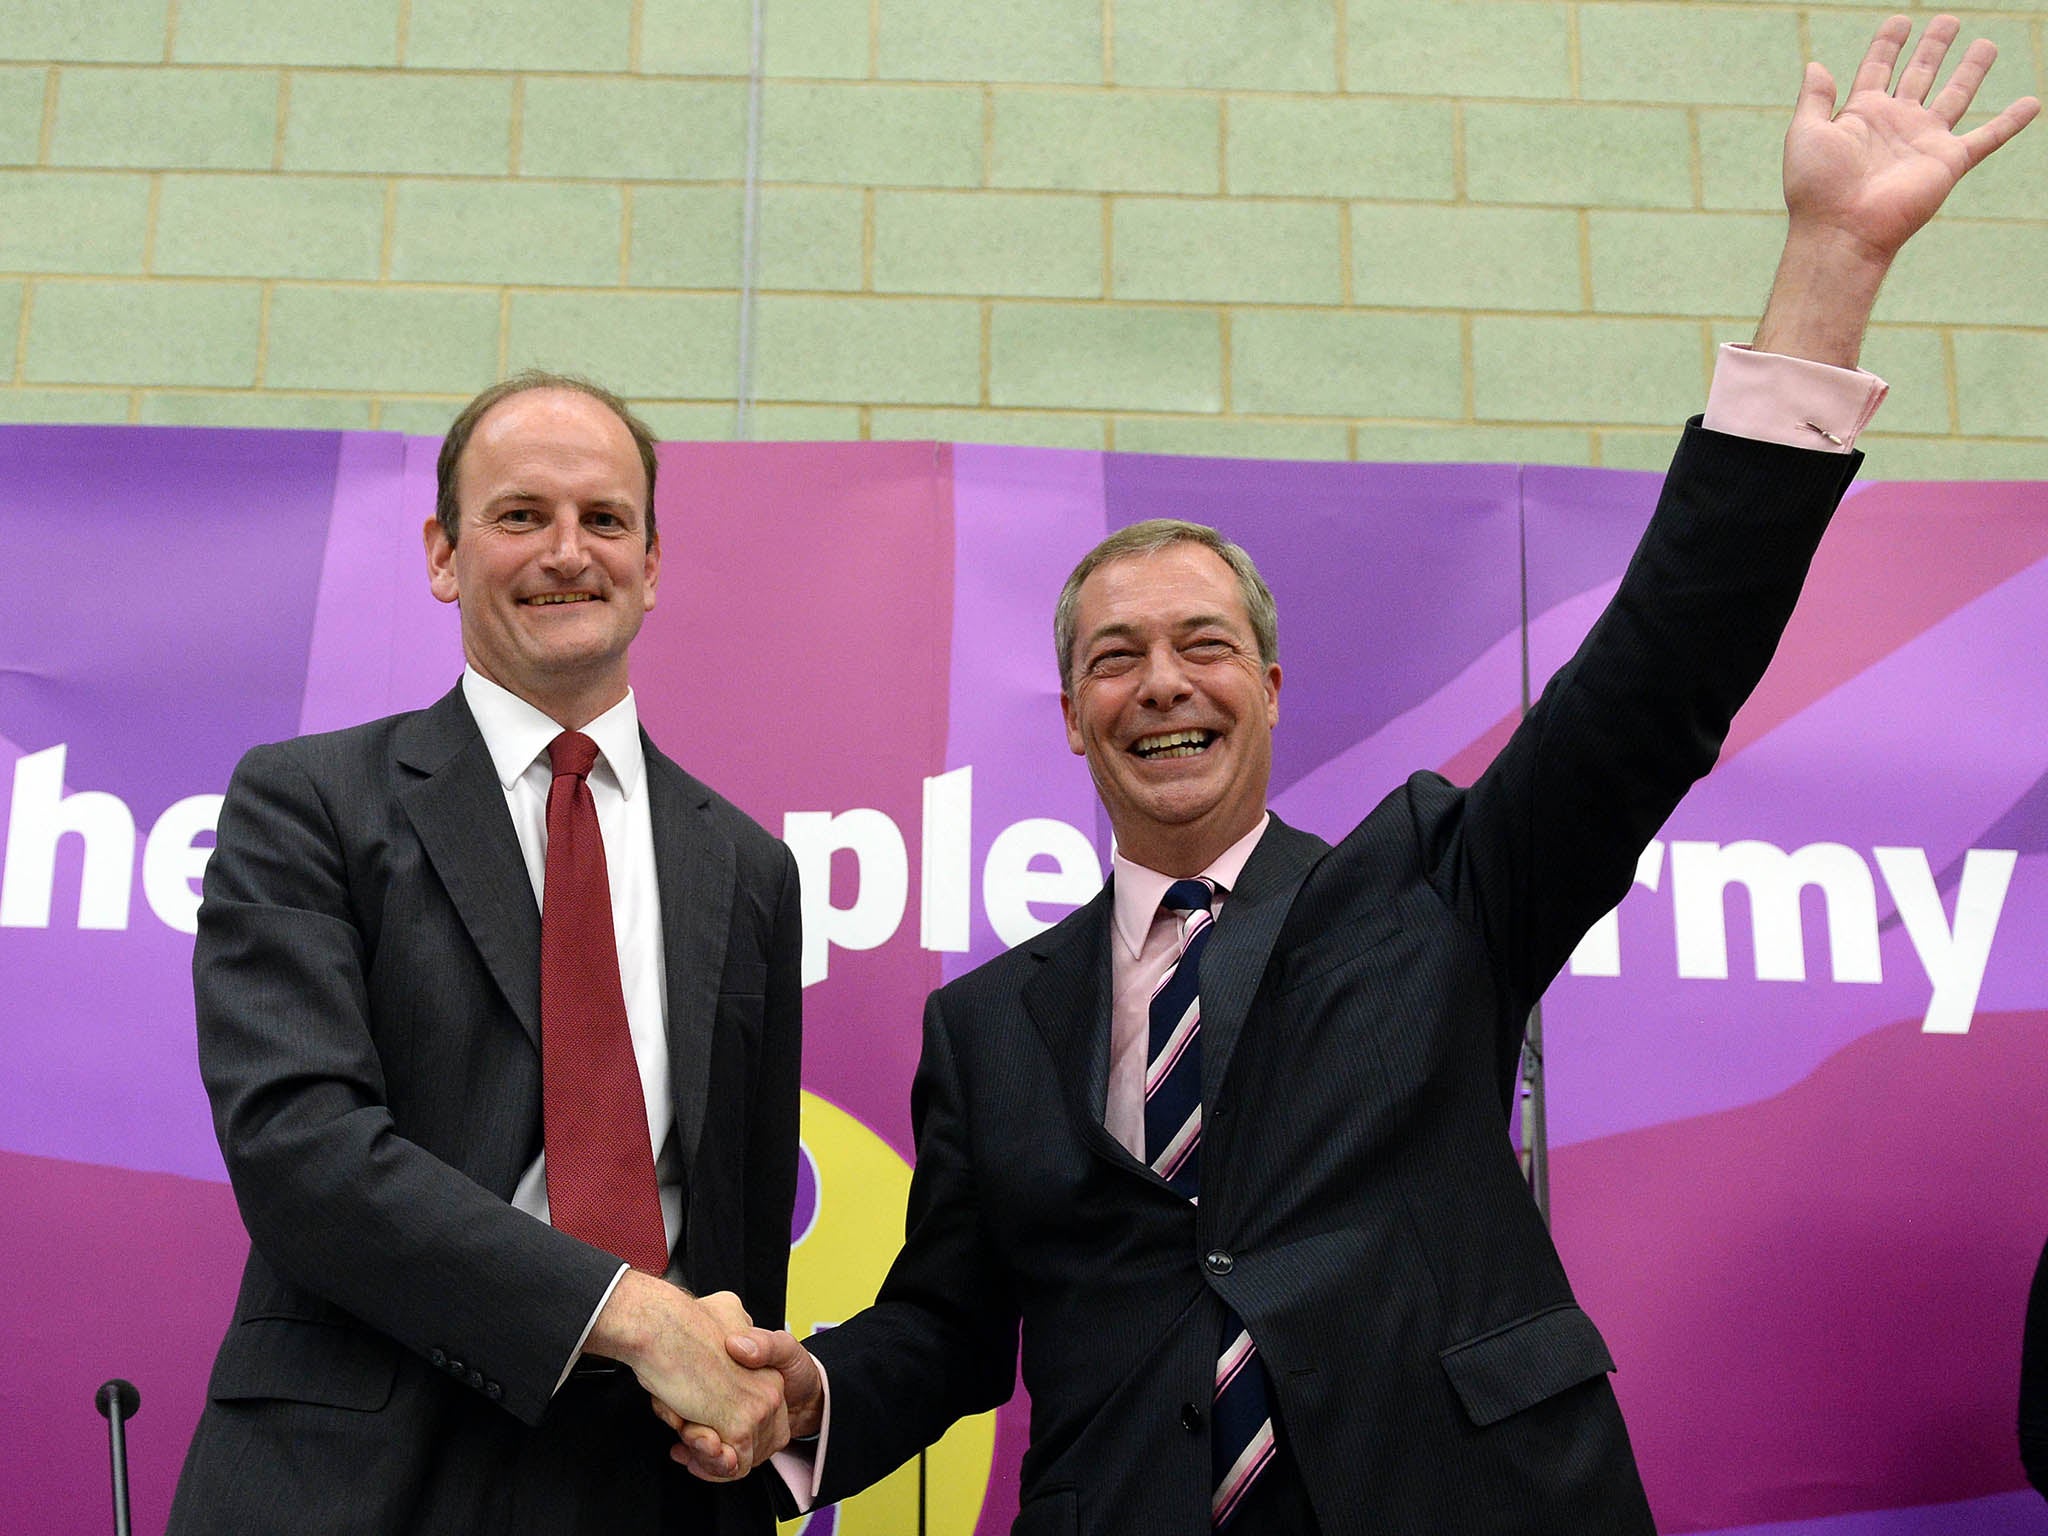 Mr Carswell had told the BBC that UKIP needed “to change gear and change its management if it’s to go to the next level”